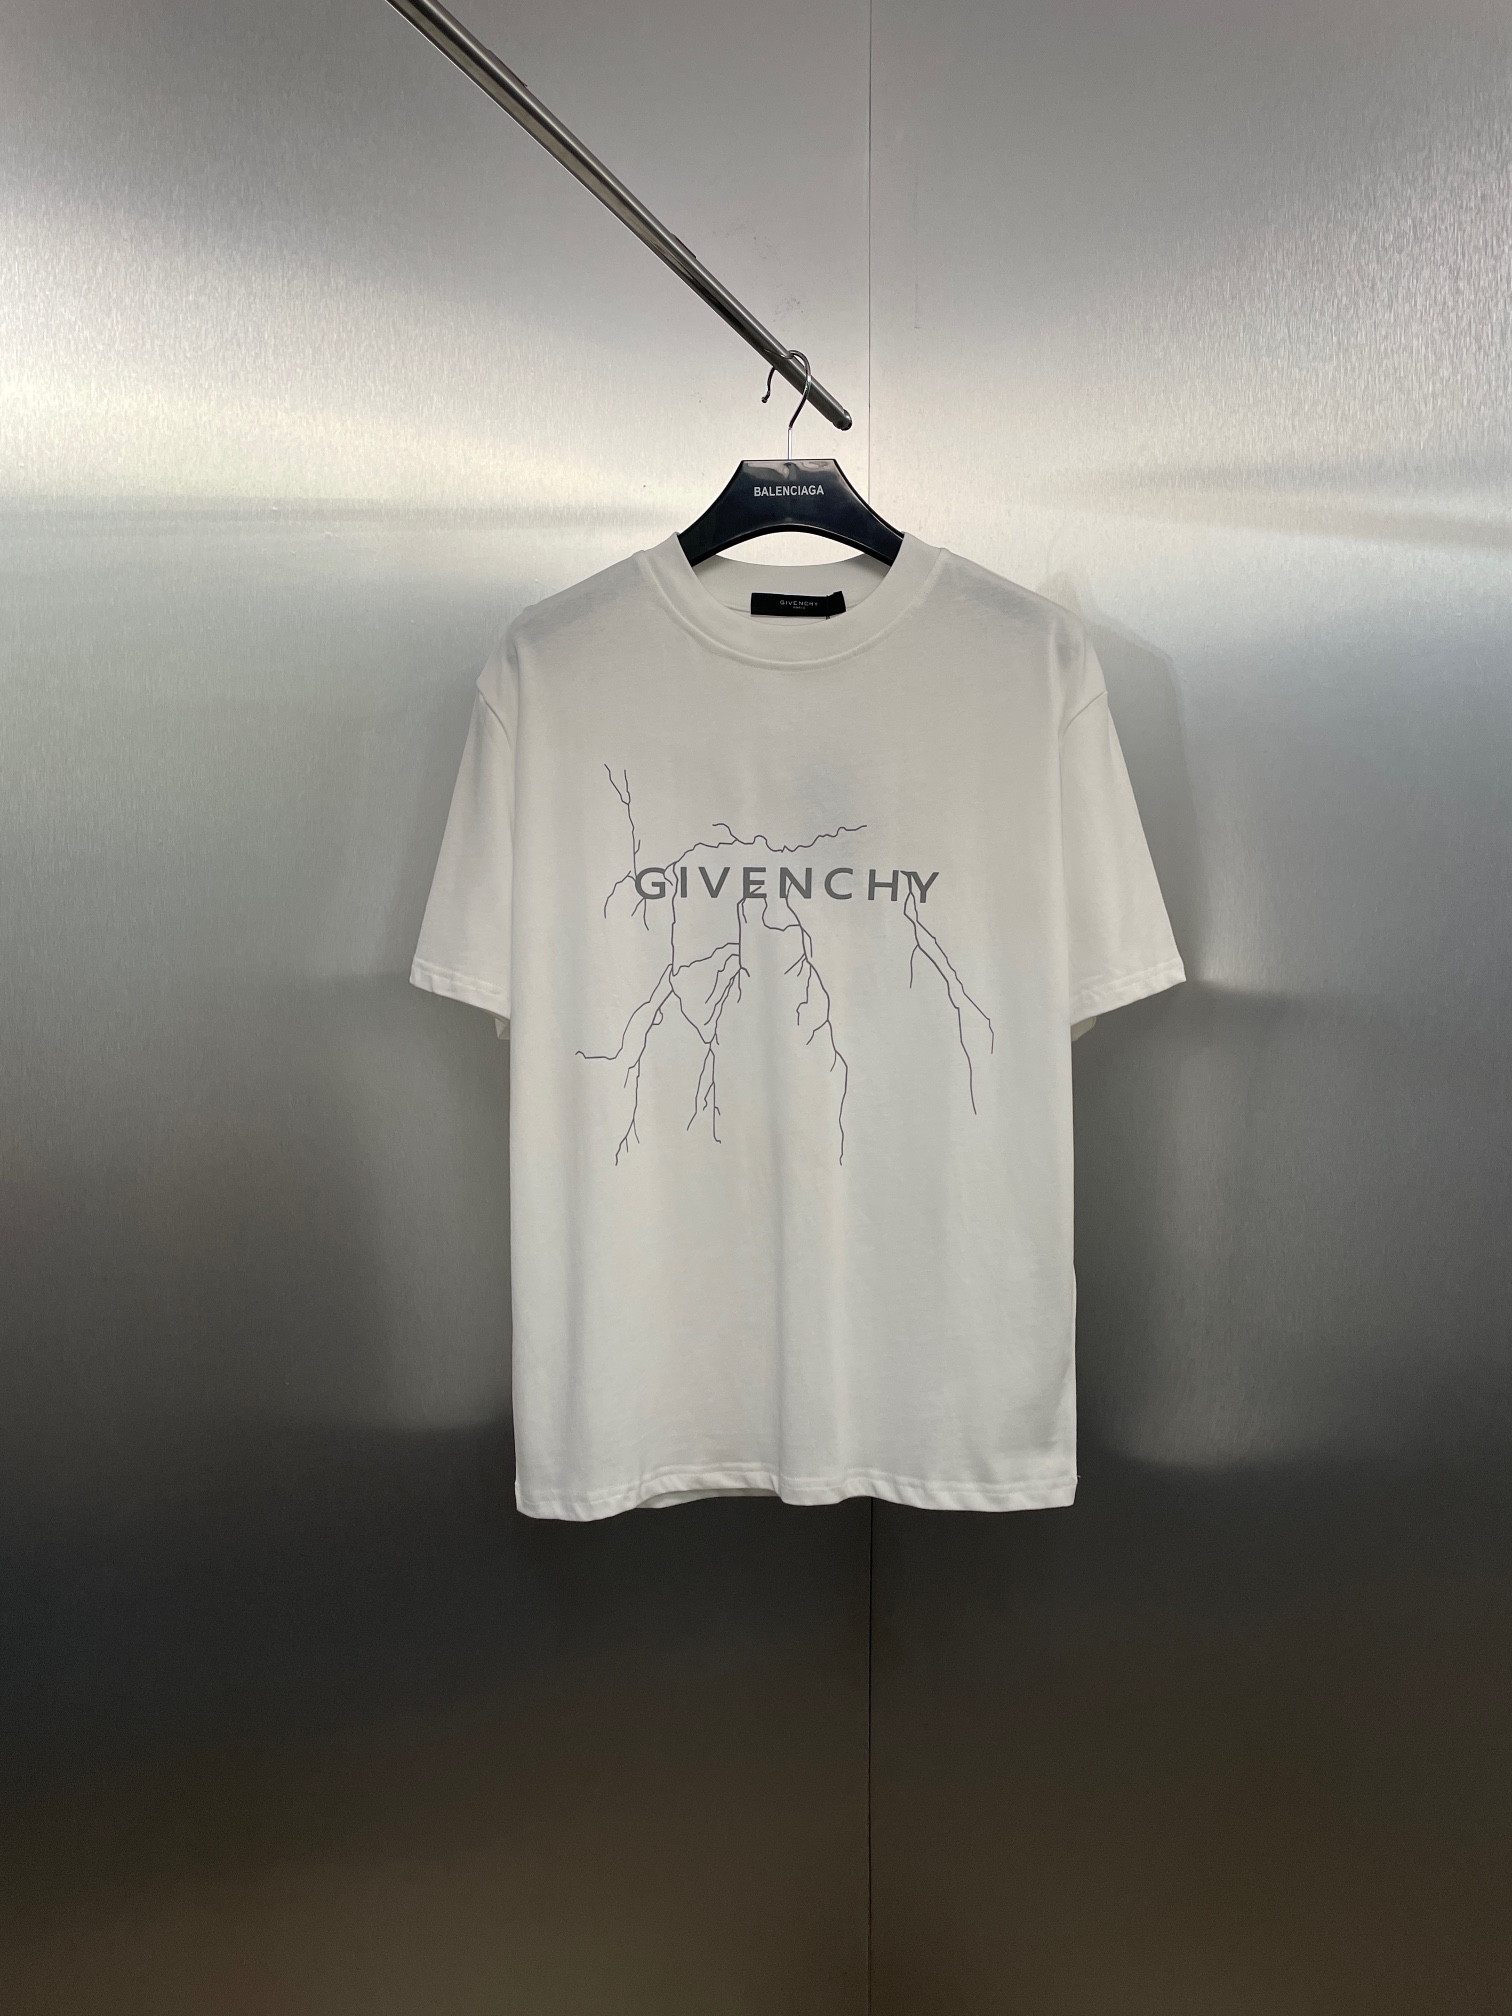 Givenchy Clothing T-Shirt for sale online
 Black White Unisex Spring/Summer Collection Fashion Short Sleeve